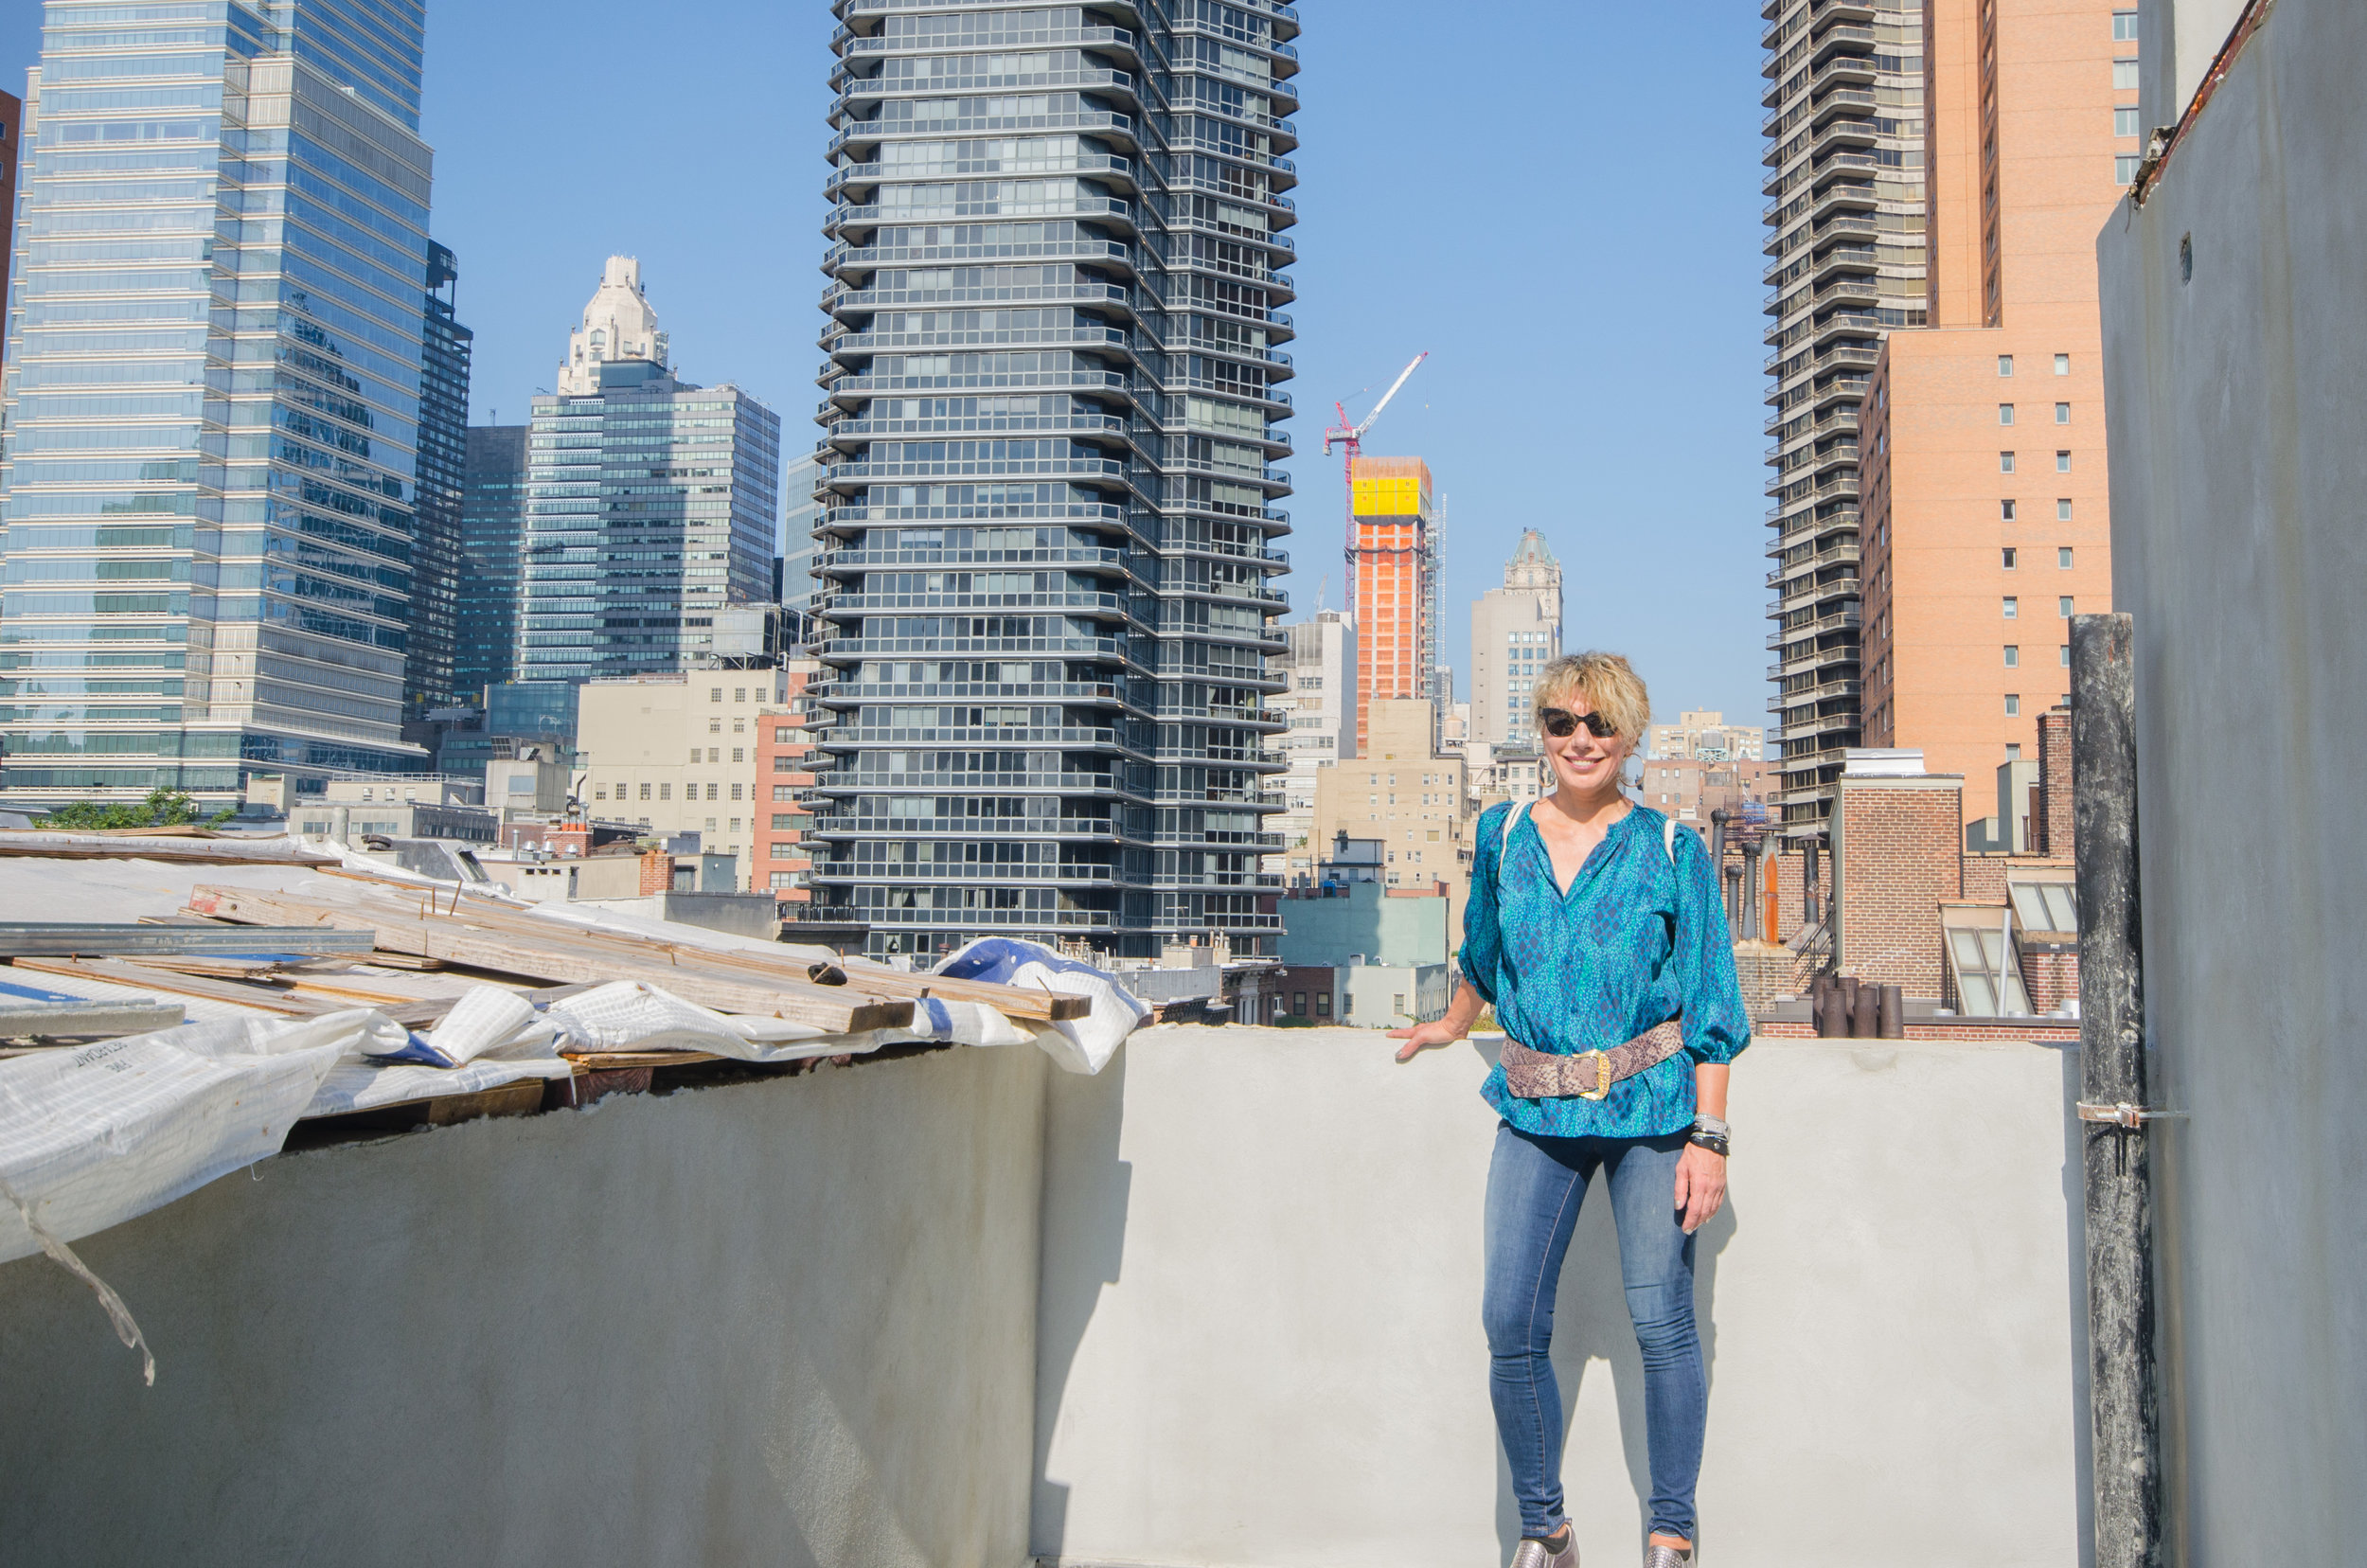  Caterina on the rooftop where the emergency generator will be located.  TRA Studio architecture, Townhouse, Upper East Side, New York, NY, Design, Modern, 251 East 61st Street, Construction, Renovation, Adaptive Reuse 